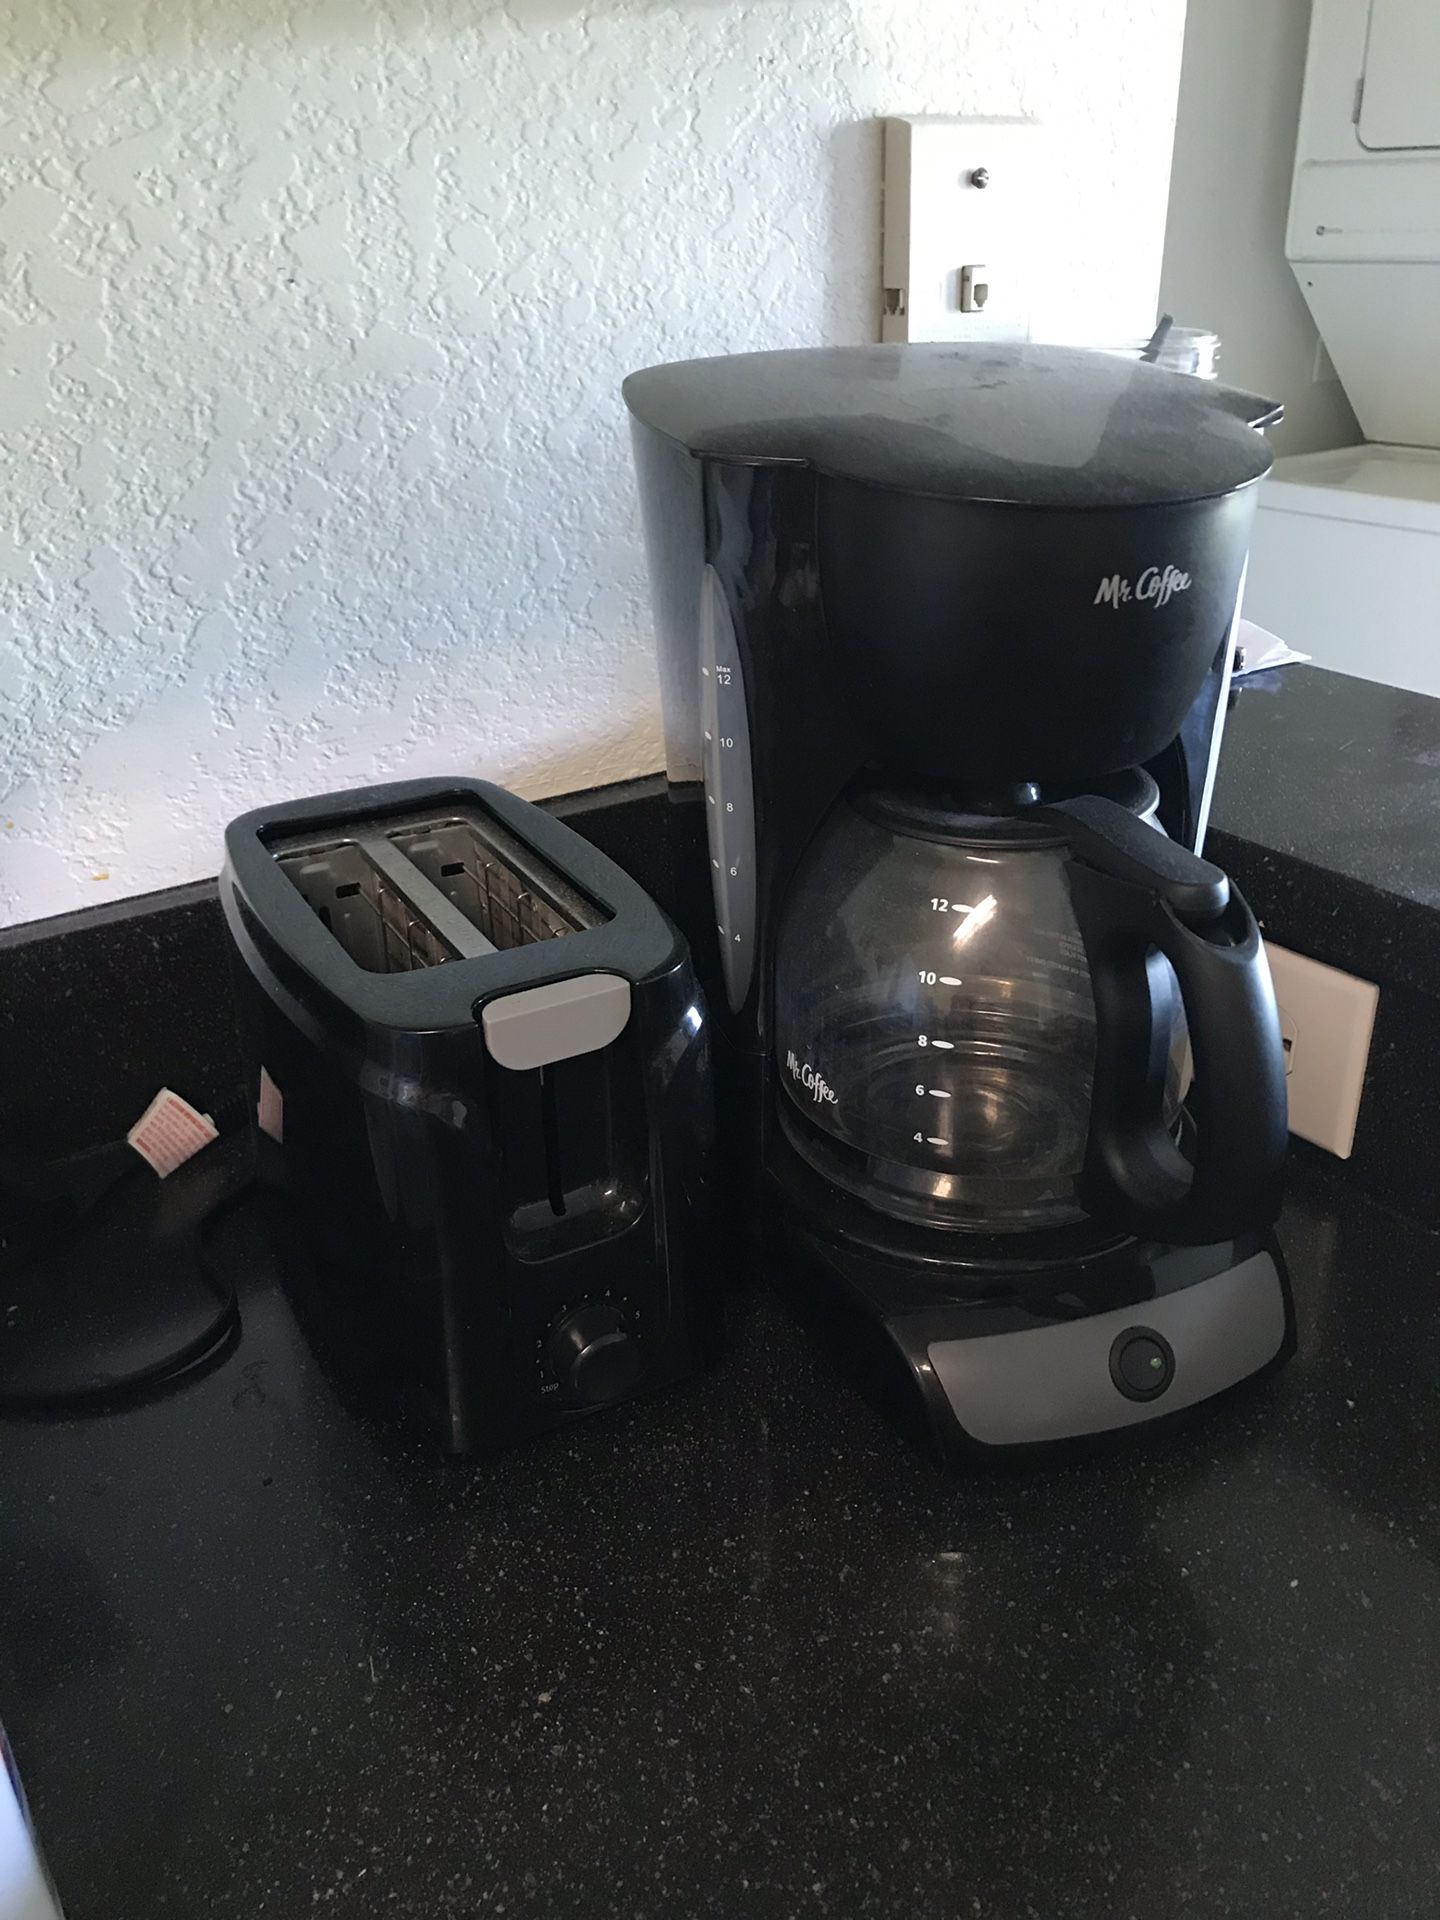 Coffee maker and toaster